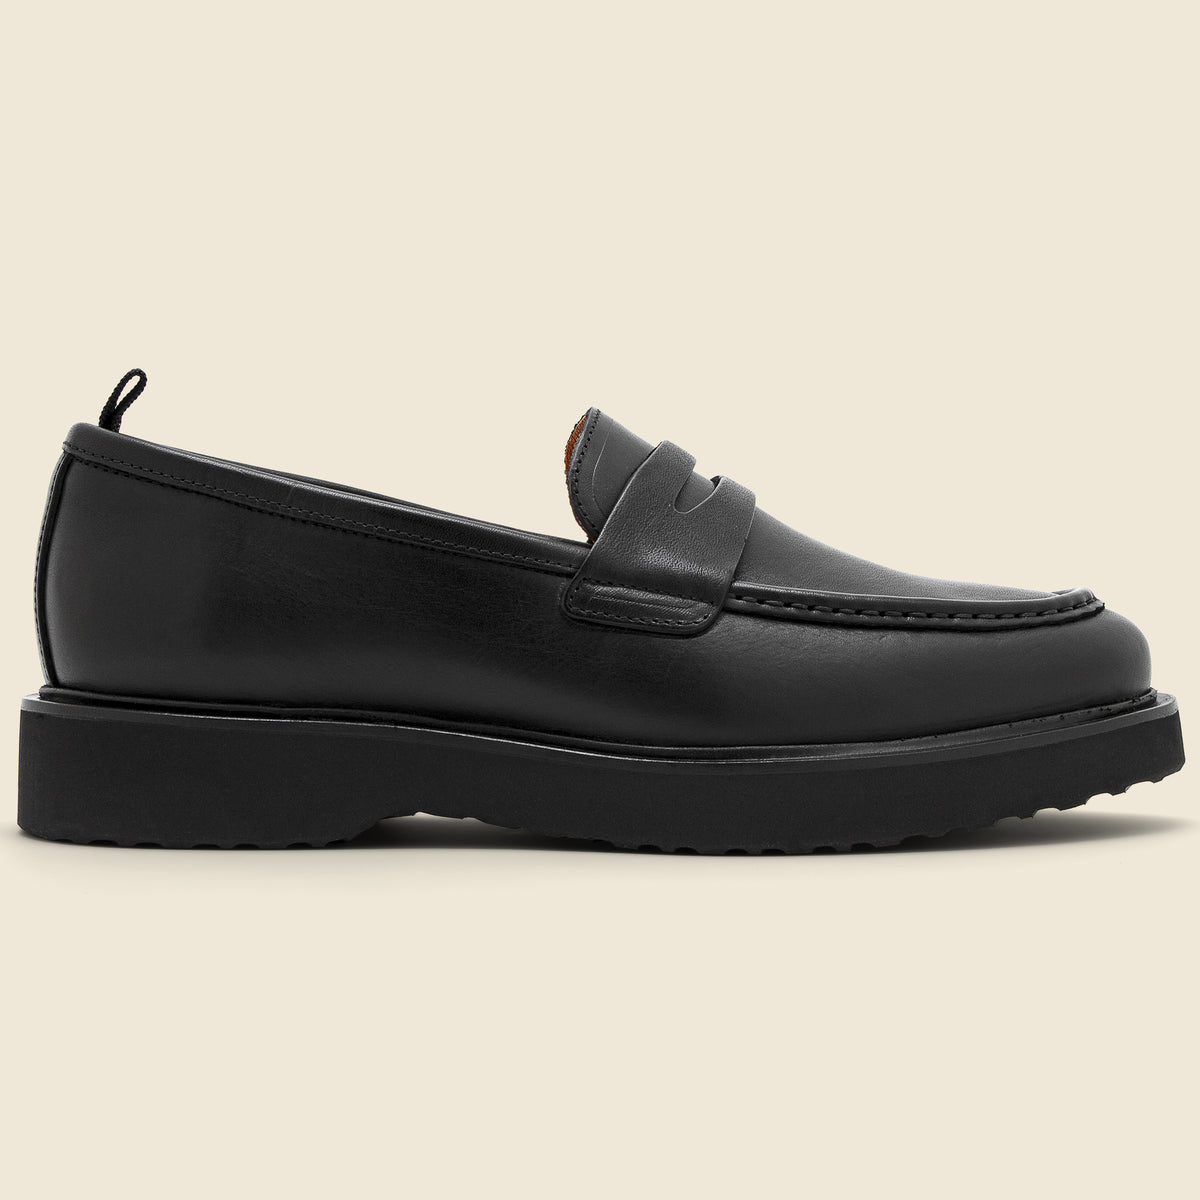 Cosmos Leather Loafer - Black